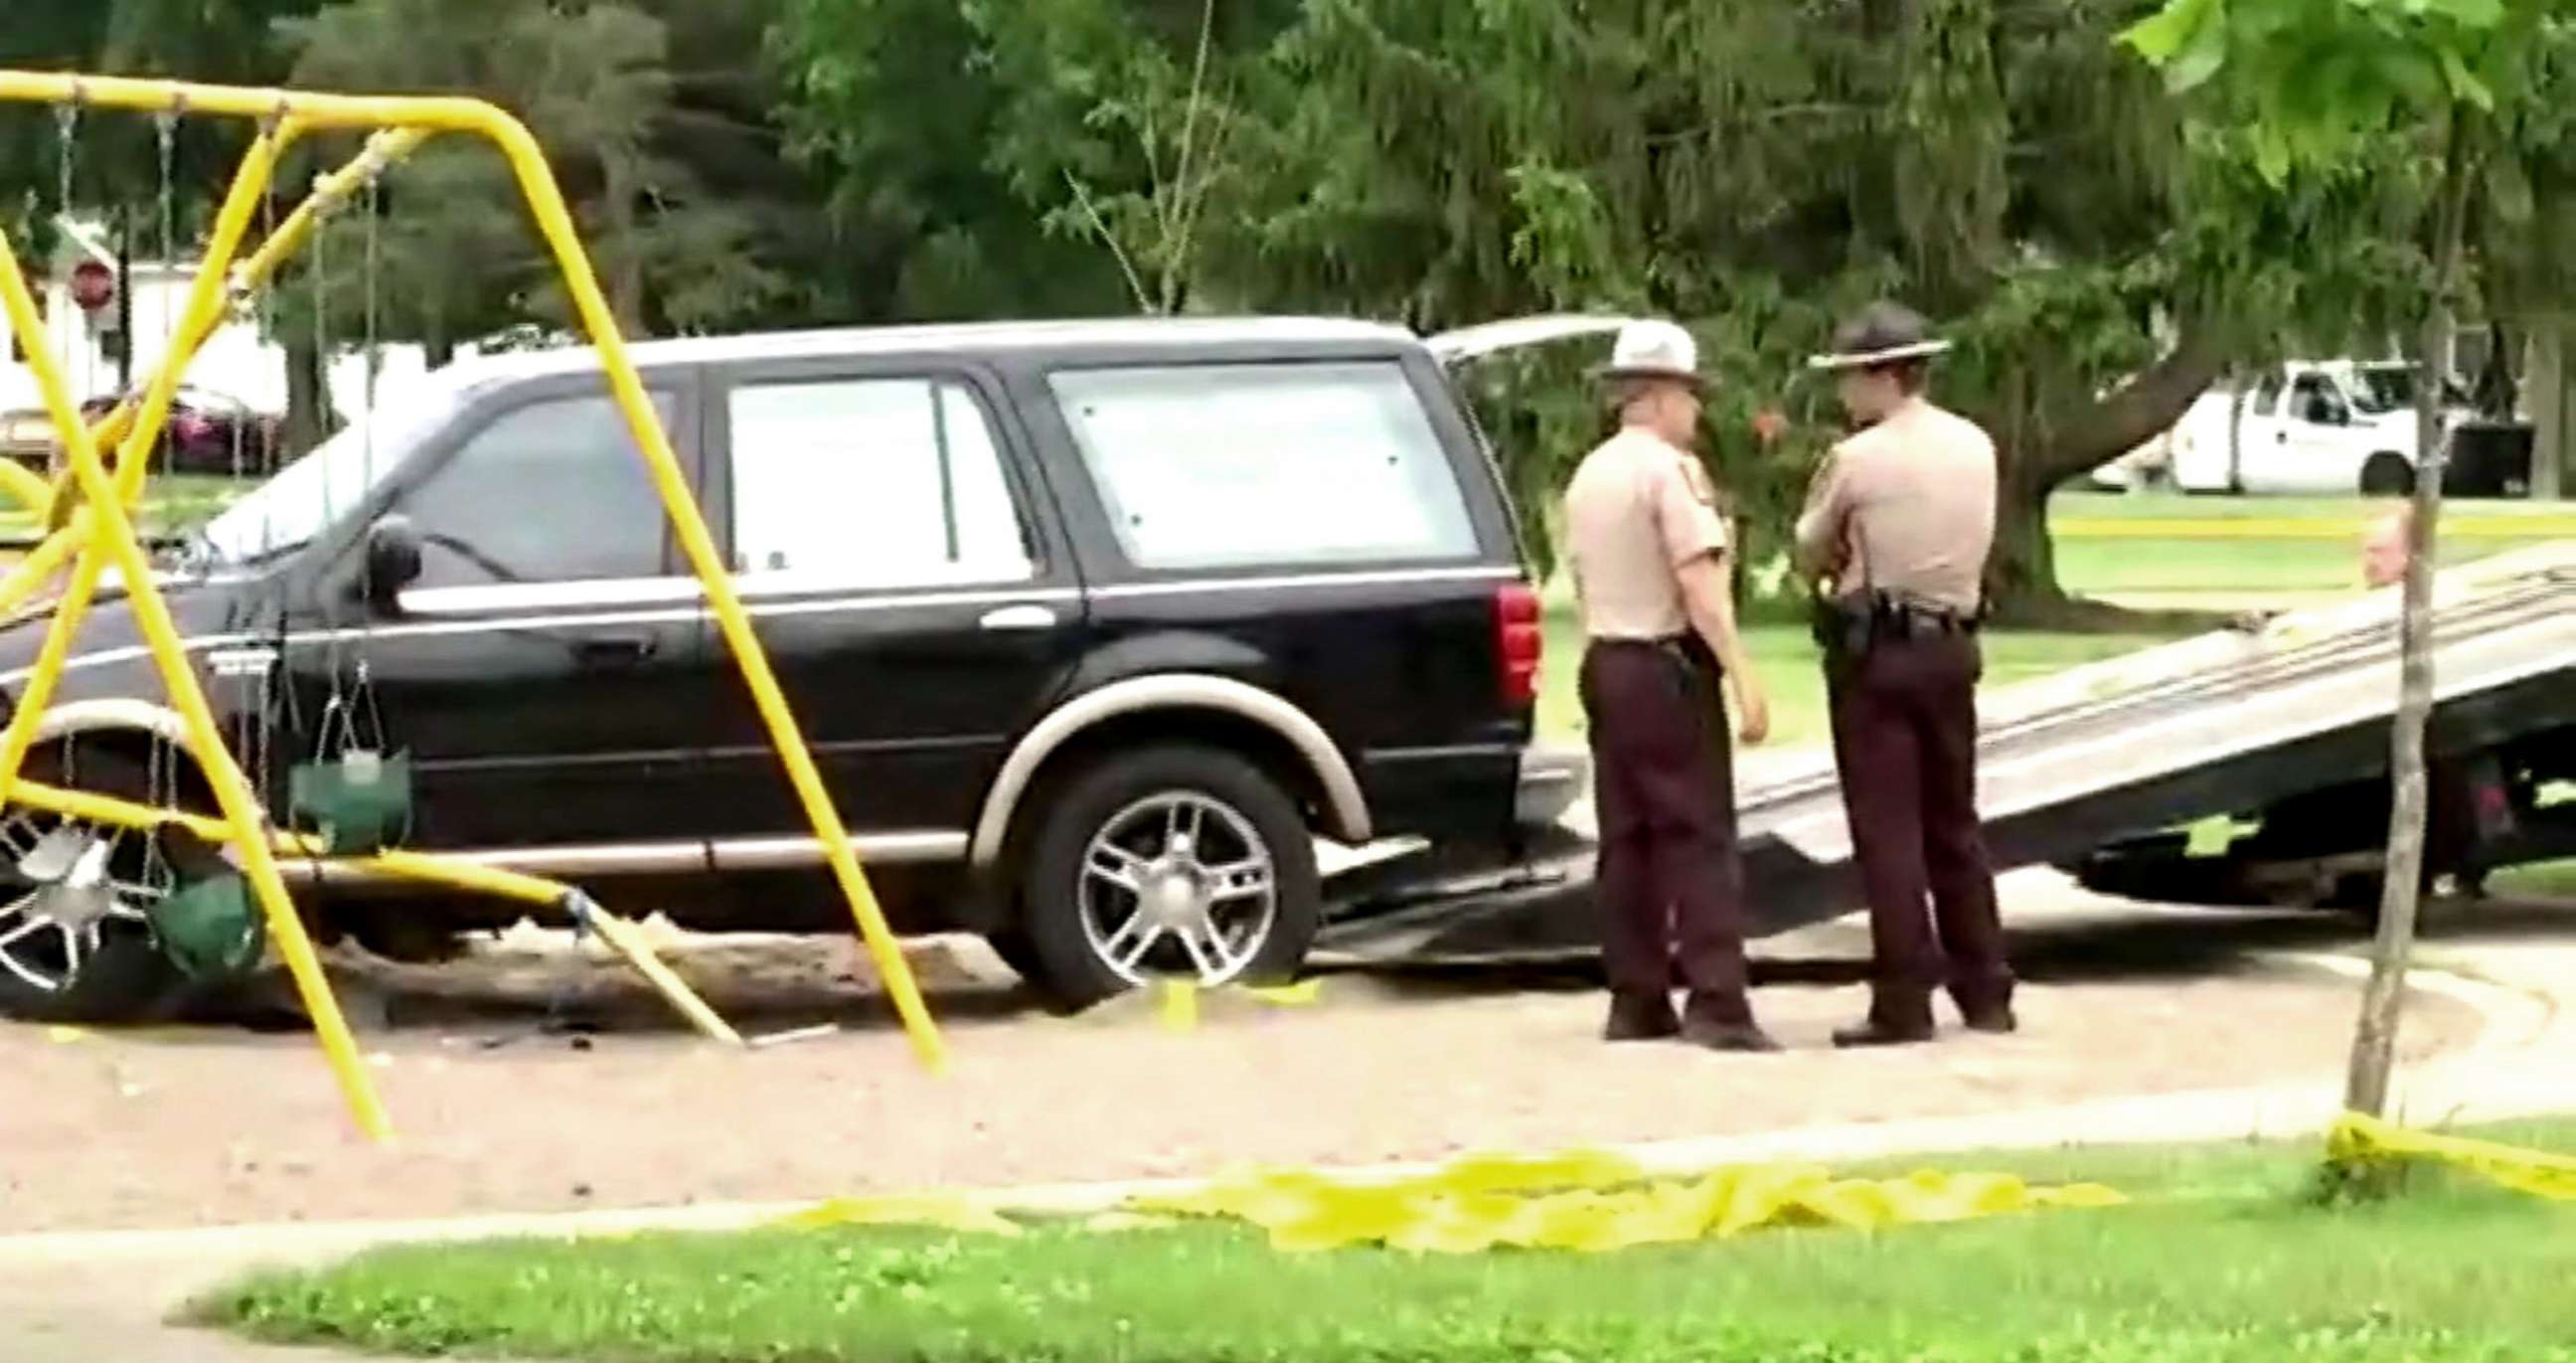 PHOTO: An SUV crashed into a Minnesota playground while fleeing from police on June 11, 2018.